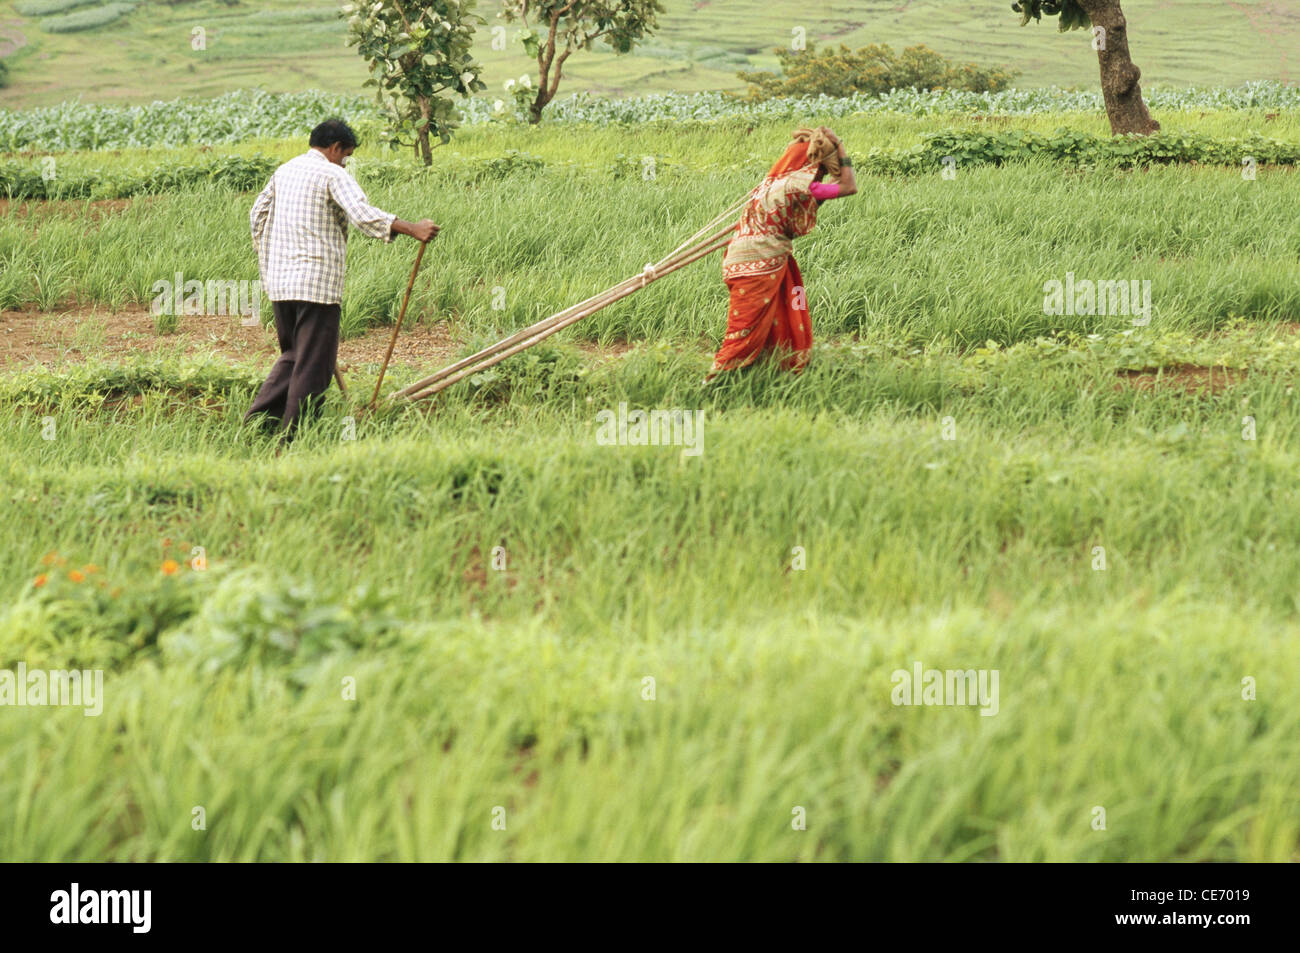 Women Ploughing High Resolution Stock Photography and Images - Alamy